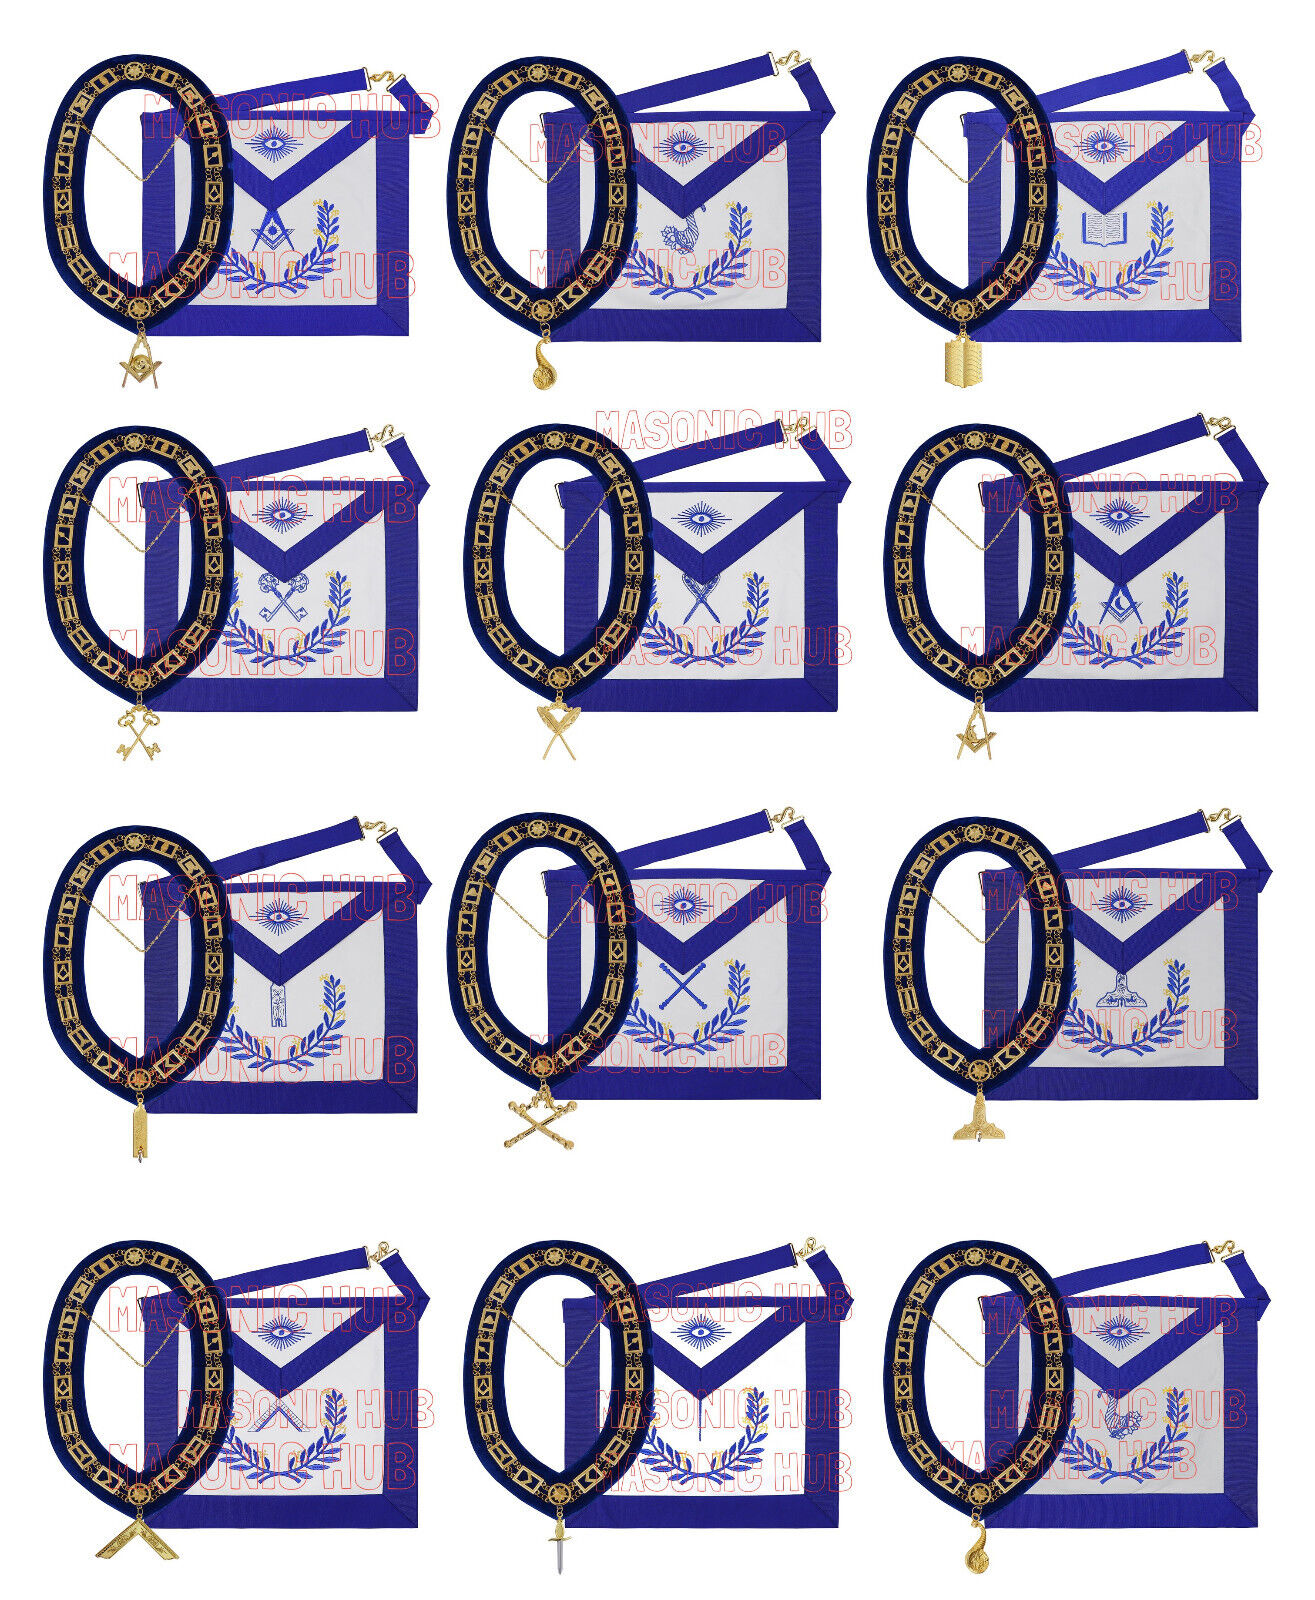 Masonic Regalia Blue Lodge Officer Aprons & Chain Collars with Jewels Set of 12